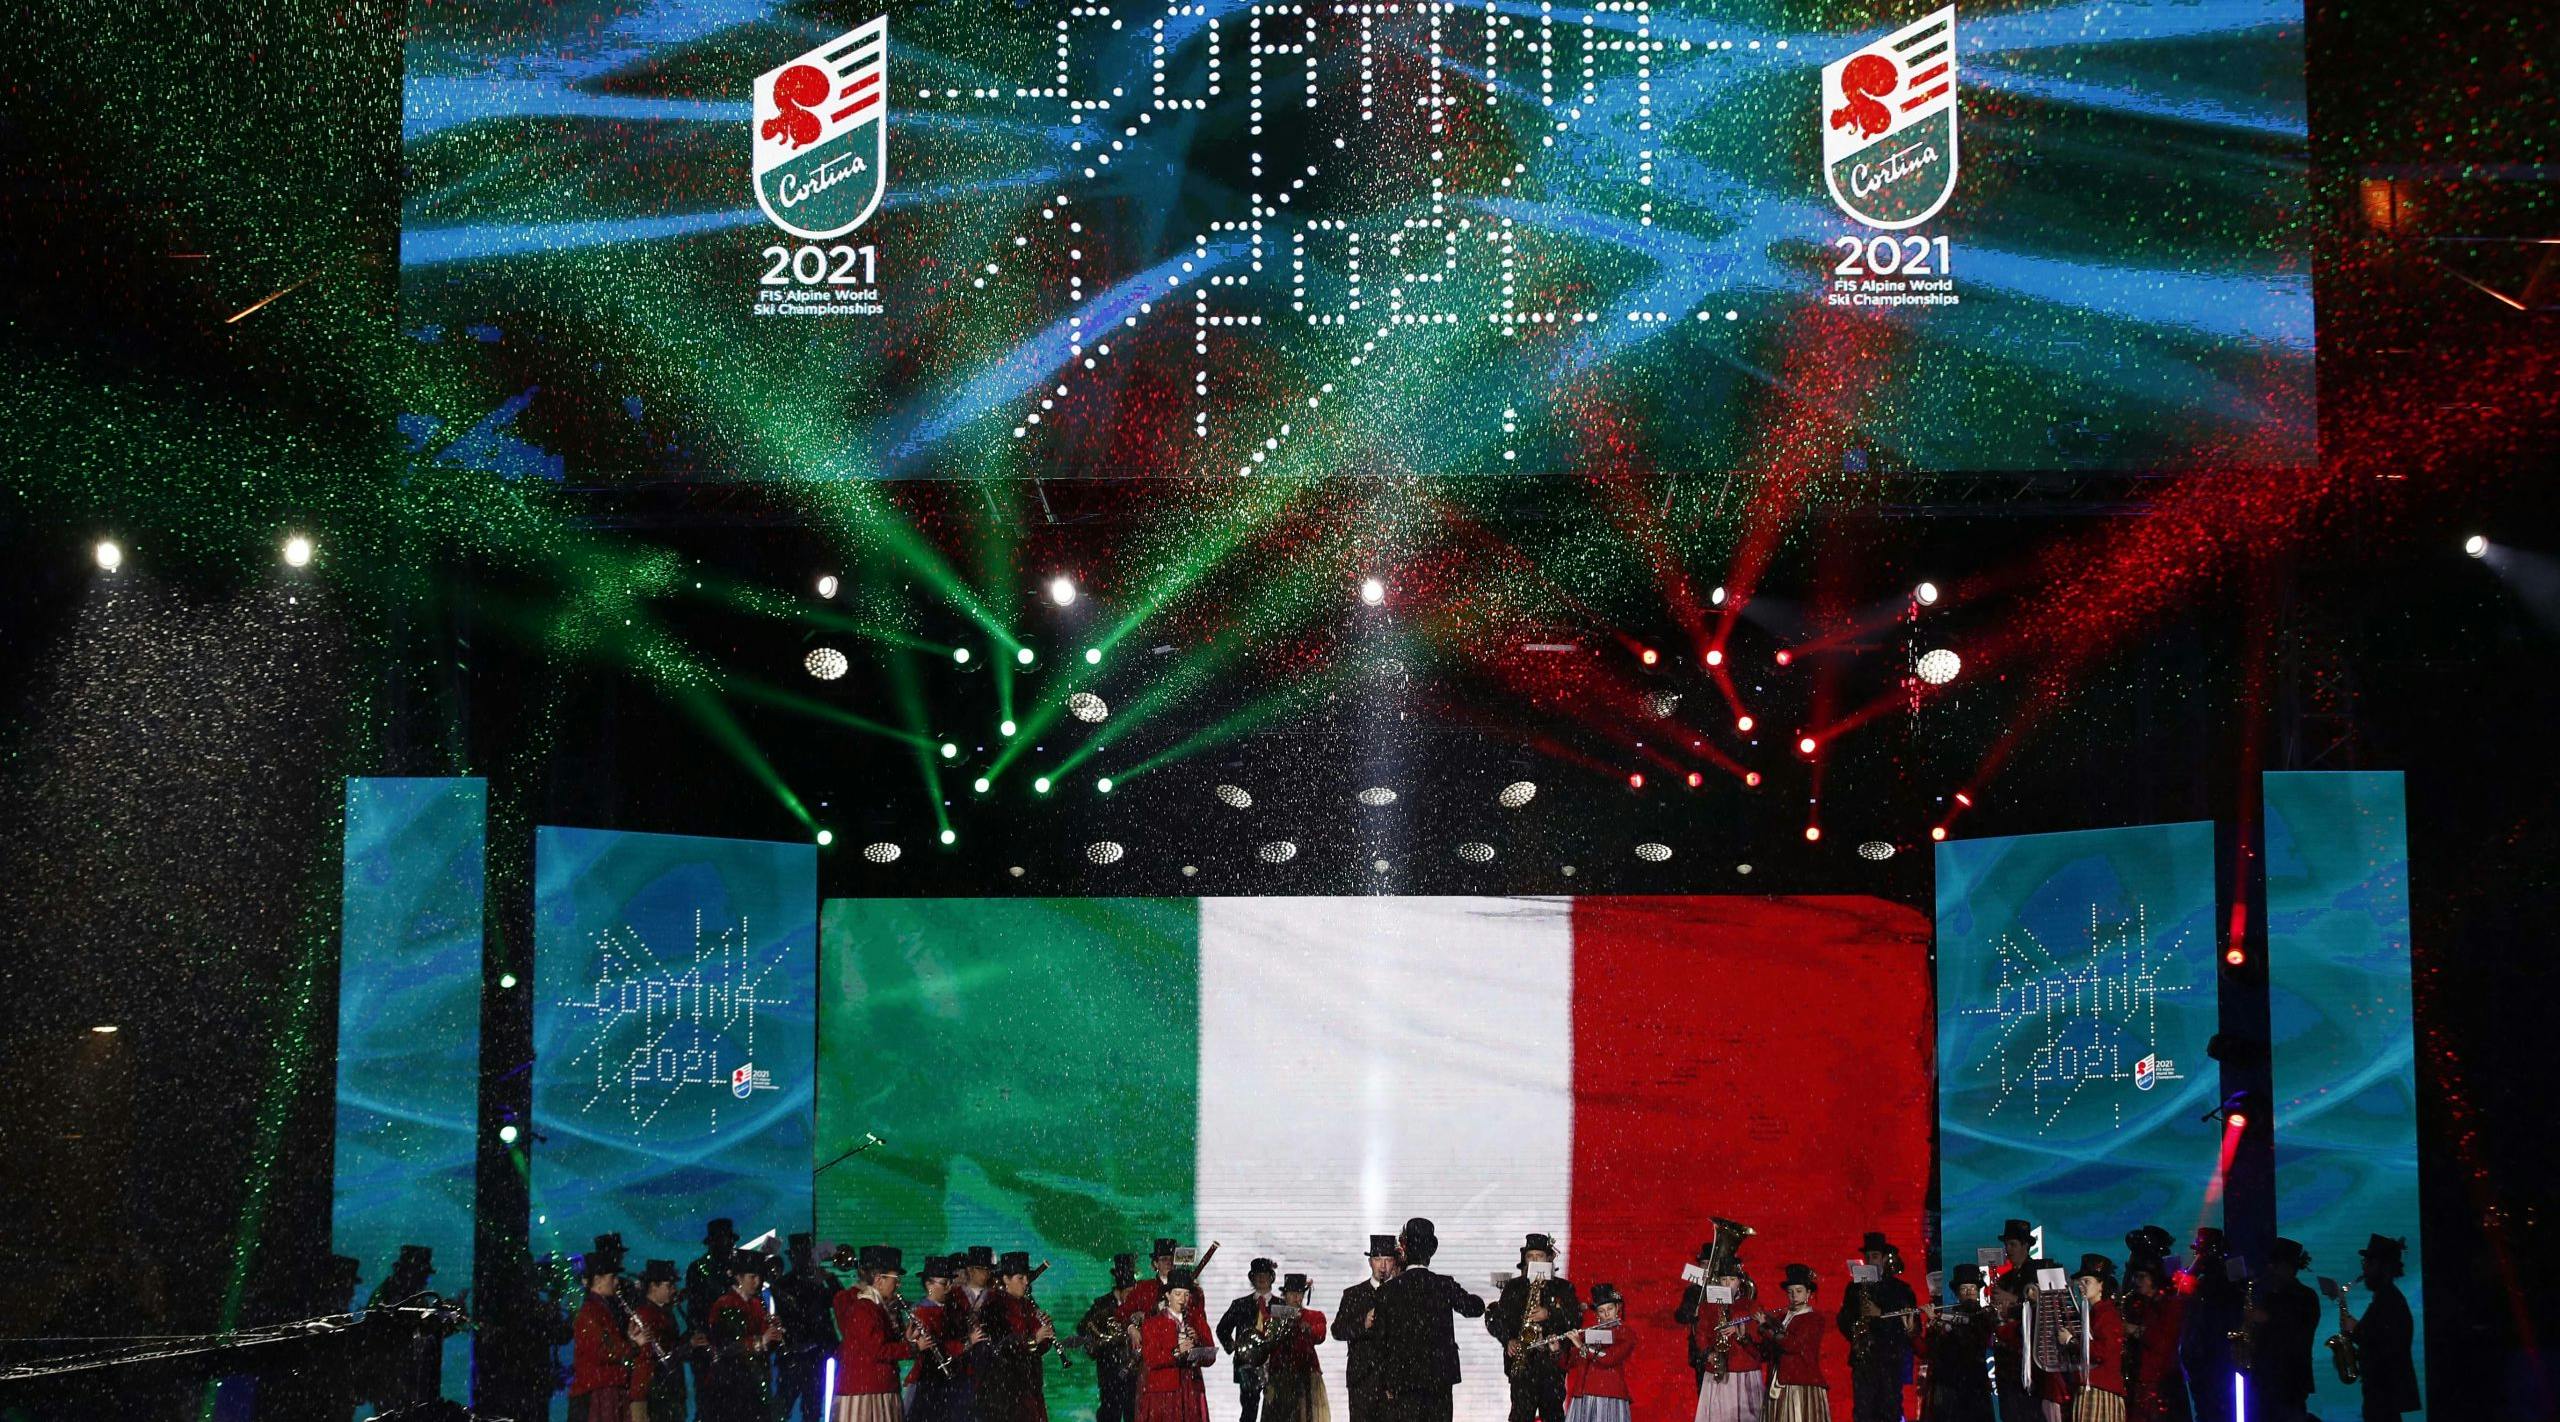 Big event with Italian flag in the background